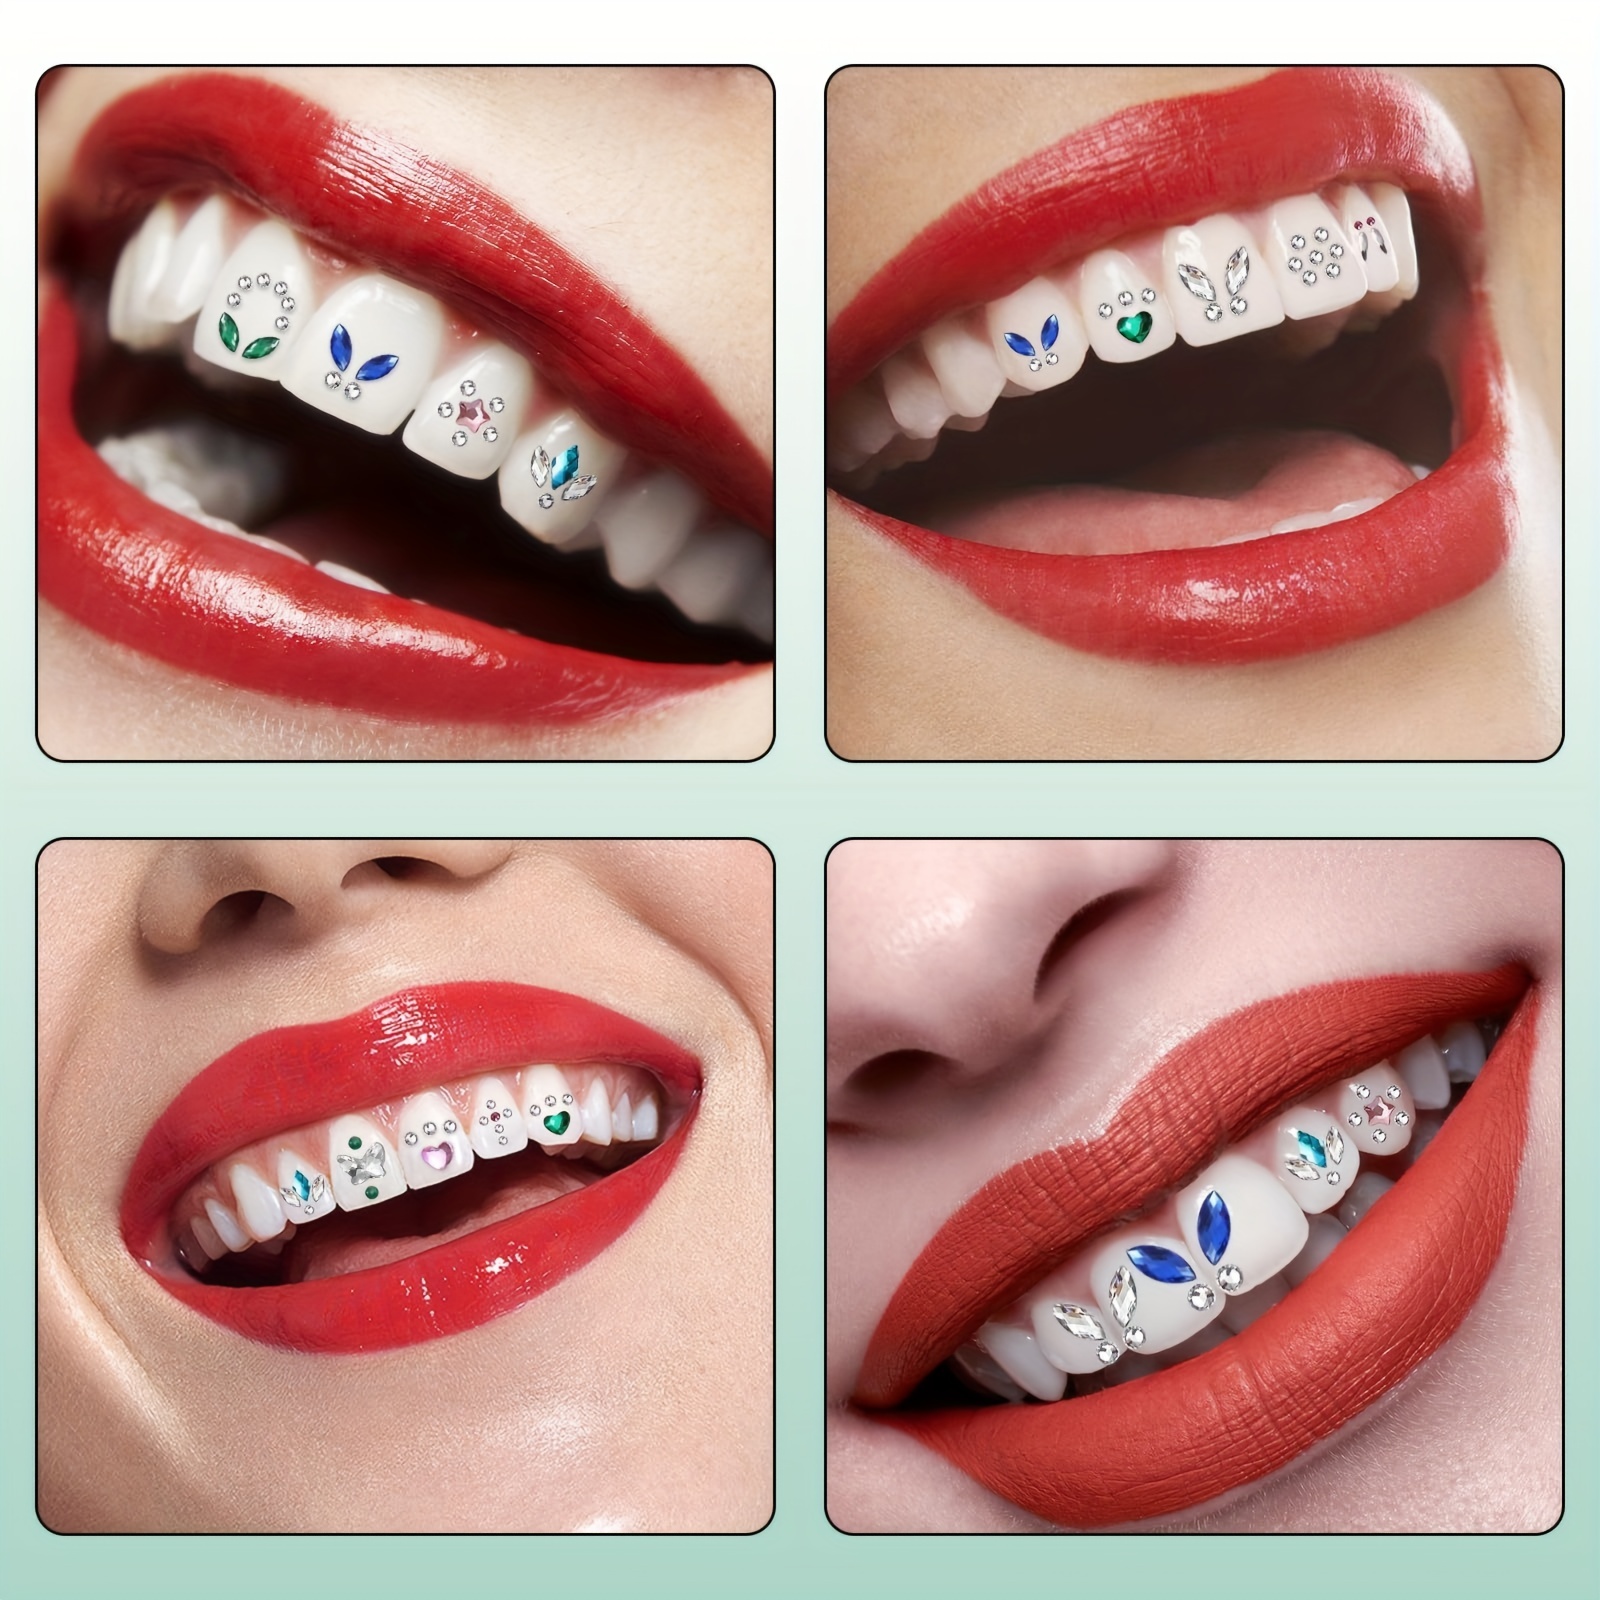 Dental Crystal Tooth Ornaments Tooth Gems Teeth Jewelry Gem Hot Sale  Colorful